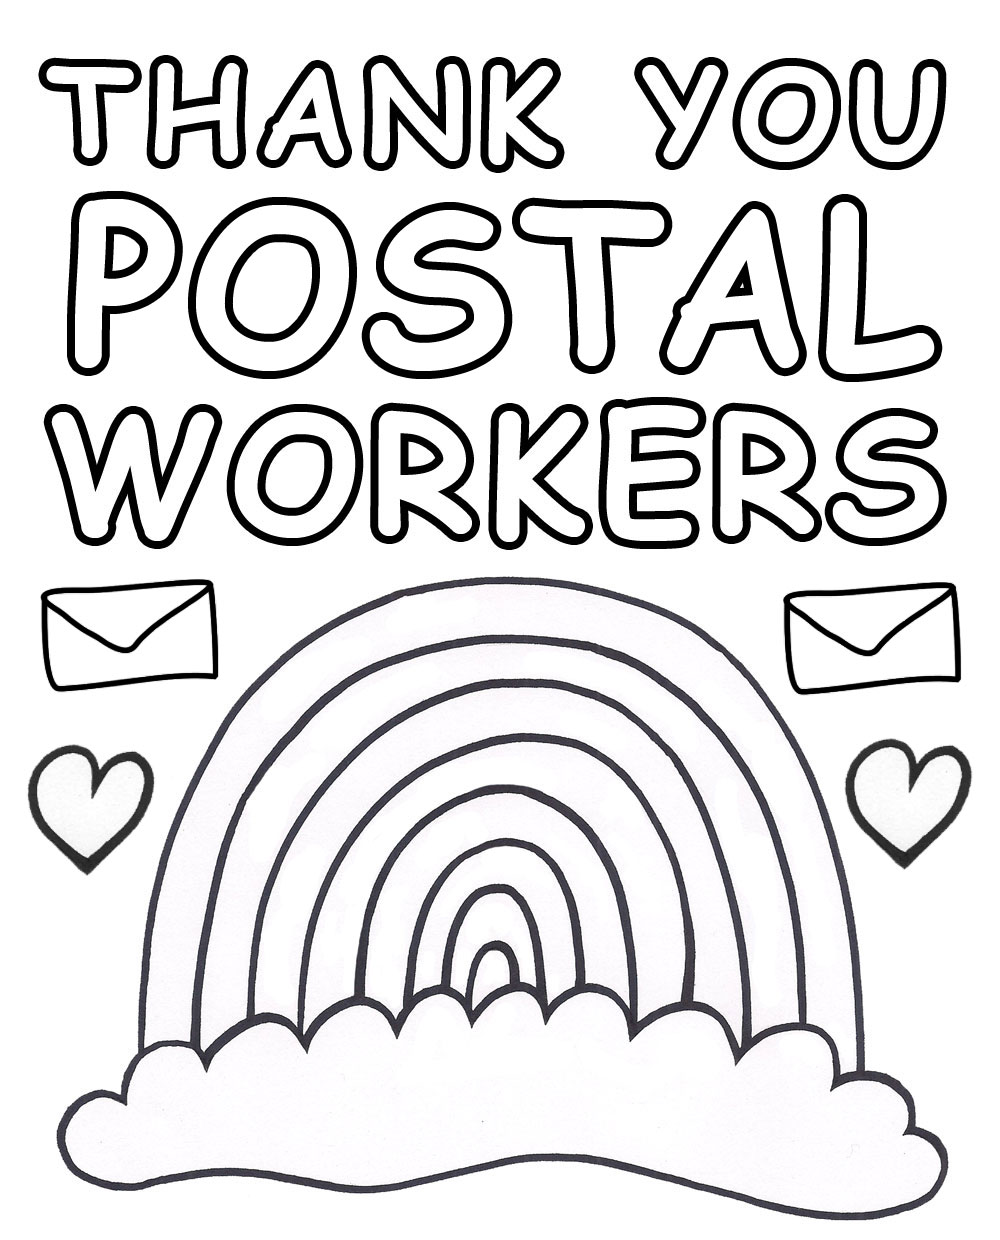 Thank You Postal Workers Rainbow Poster | Rooftop Post ...